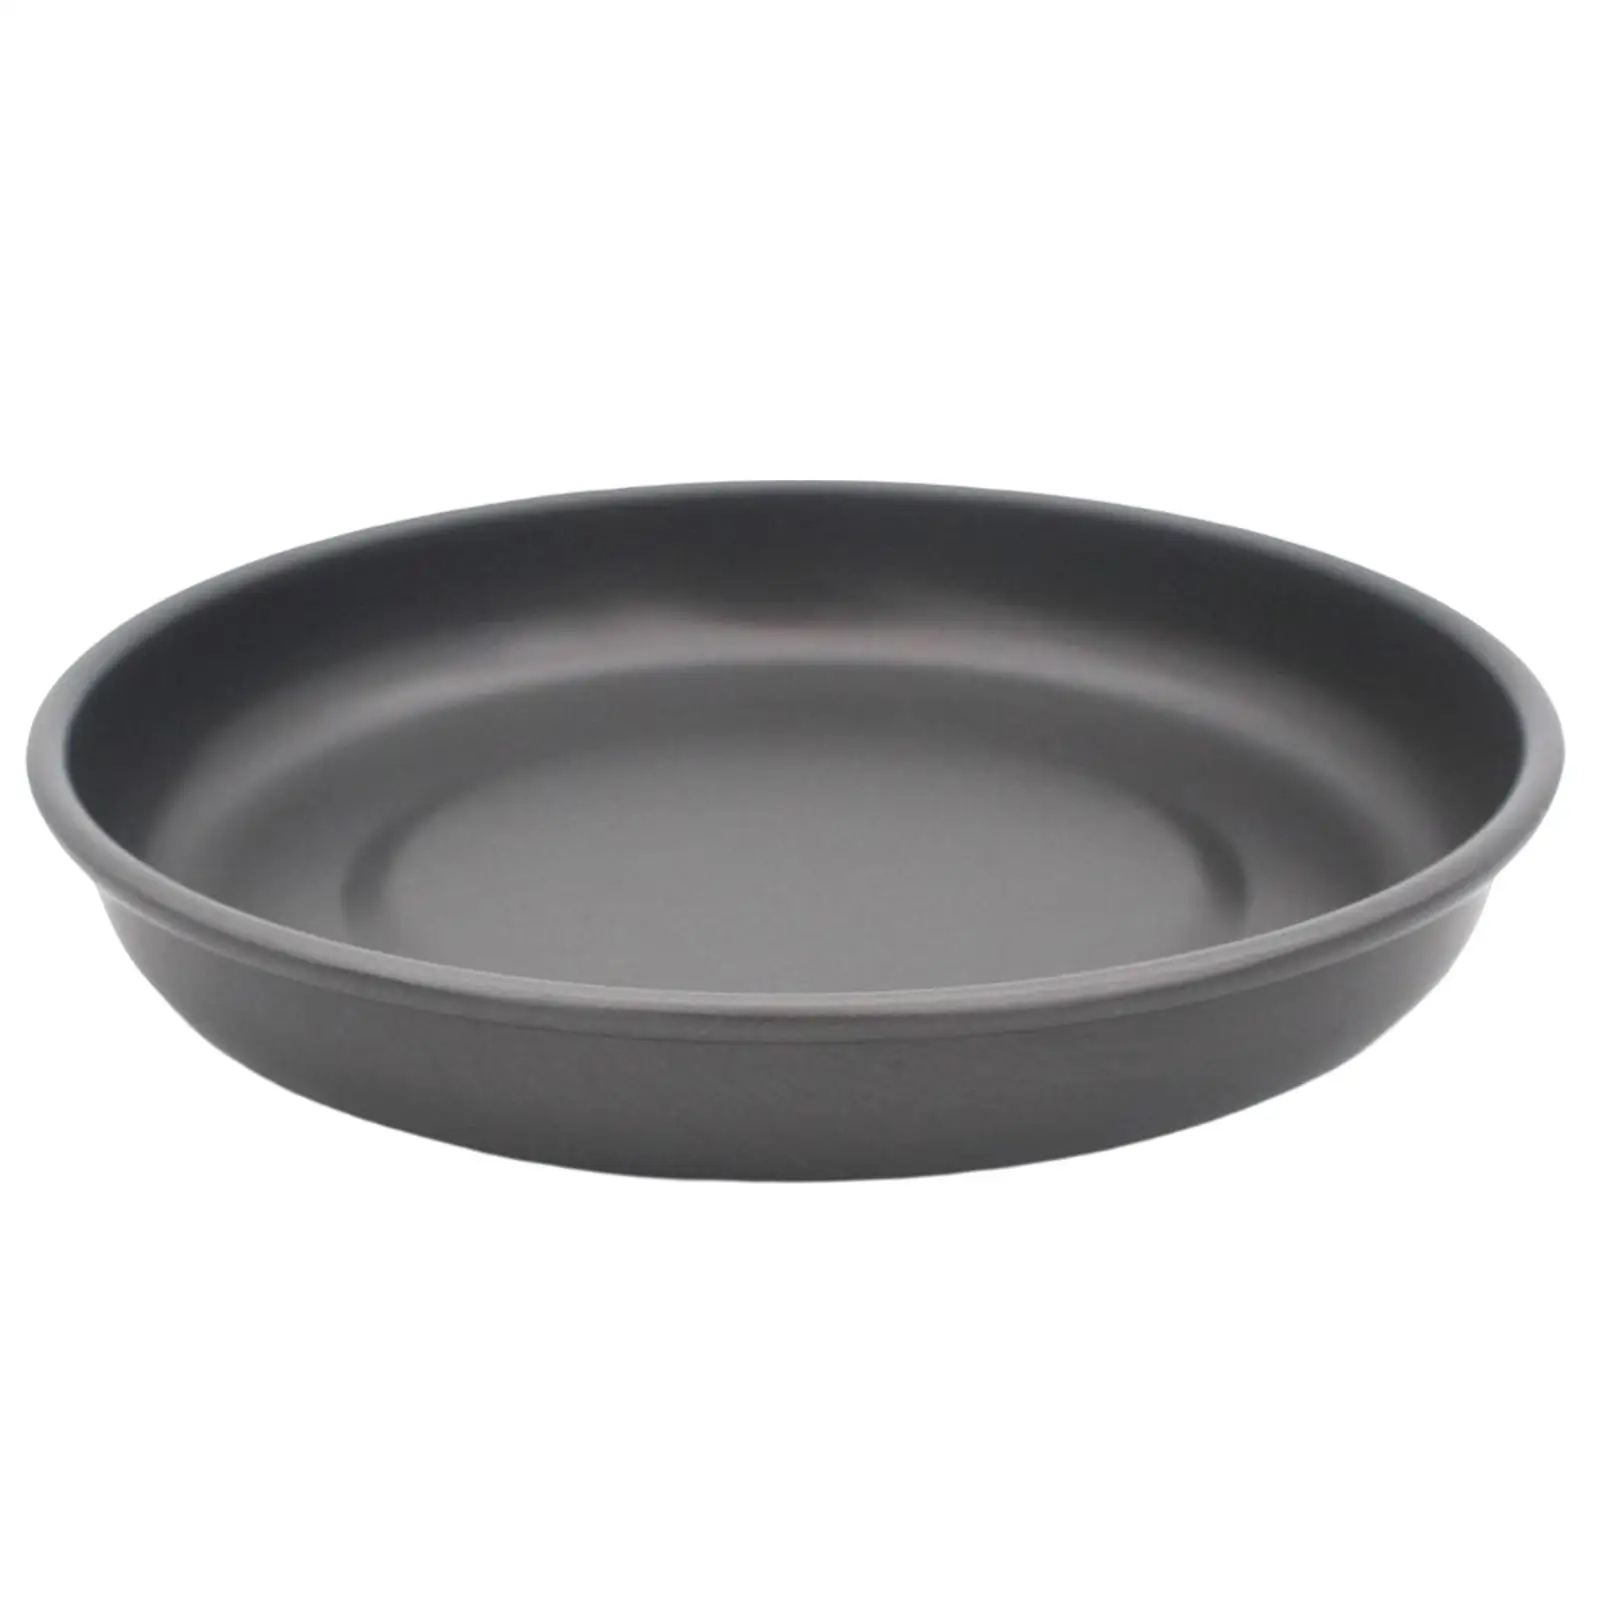 300ml Dinner Plate Round Dish Tray Serving Plates Cooking Utensil Food Container Portable Food Plate Cookware for BBQ Picnic